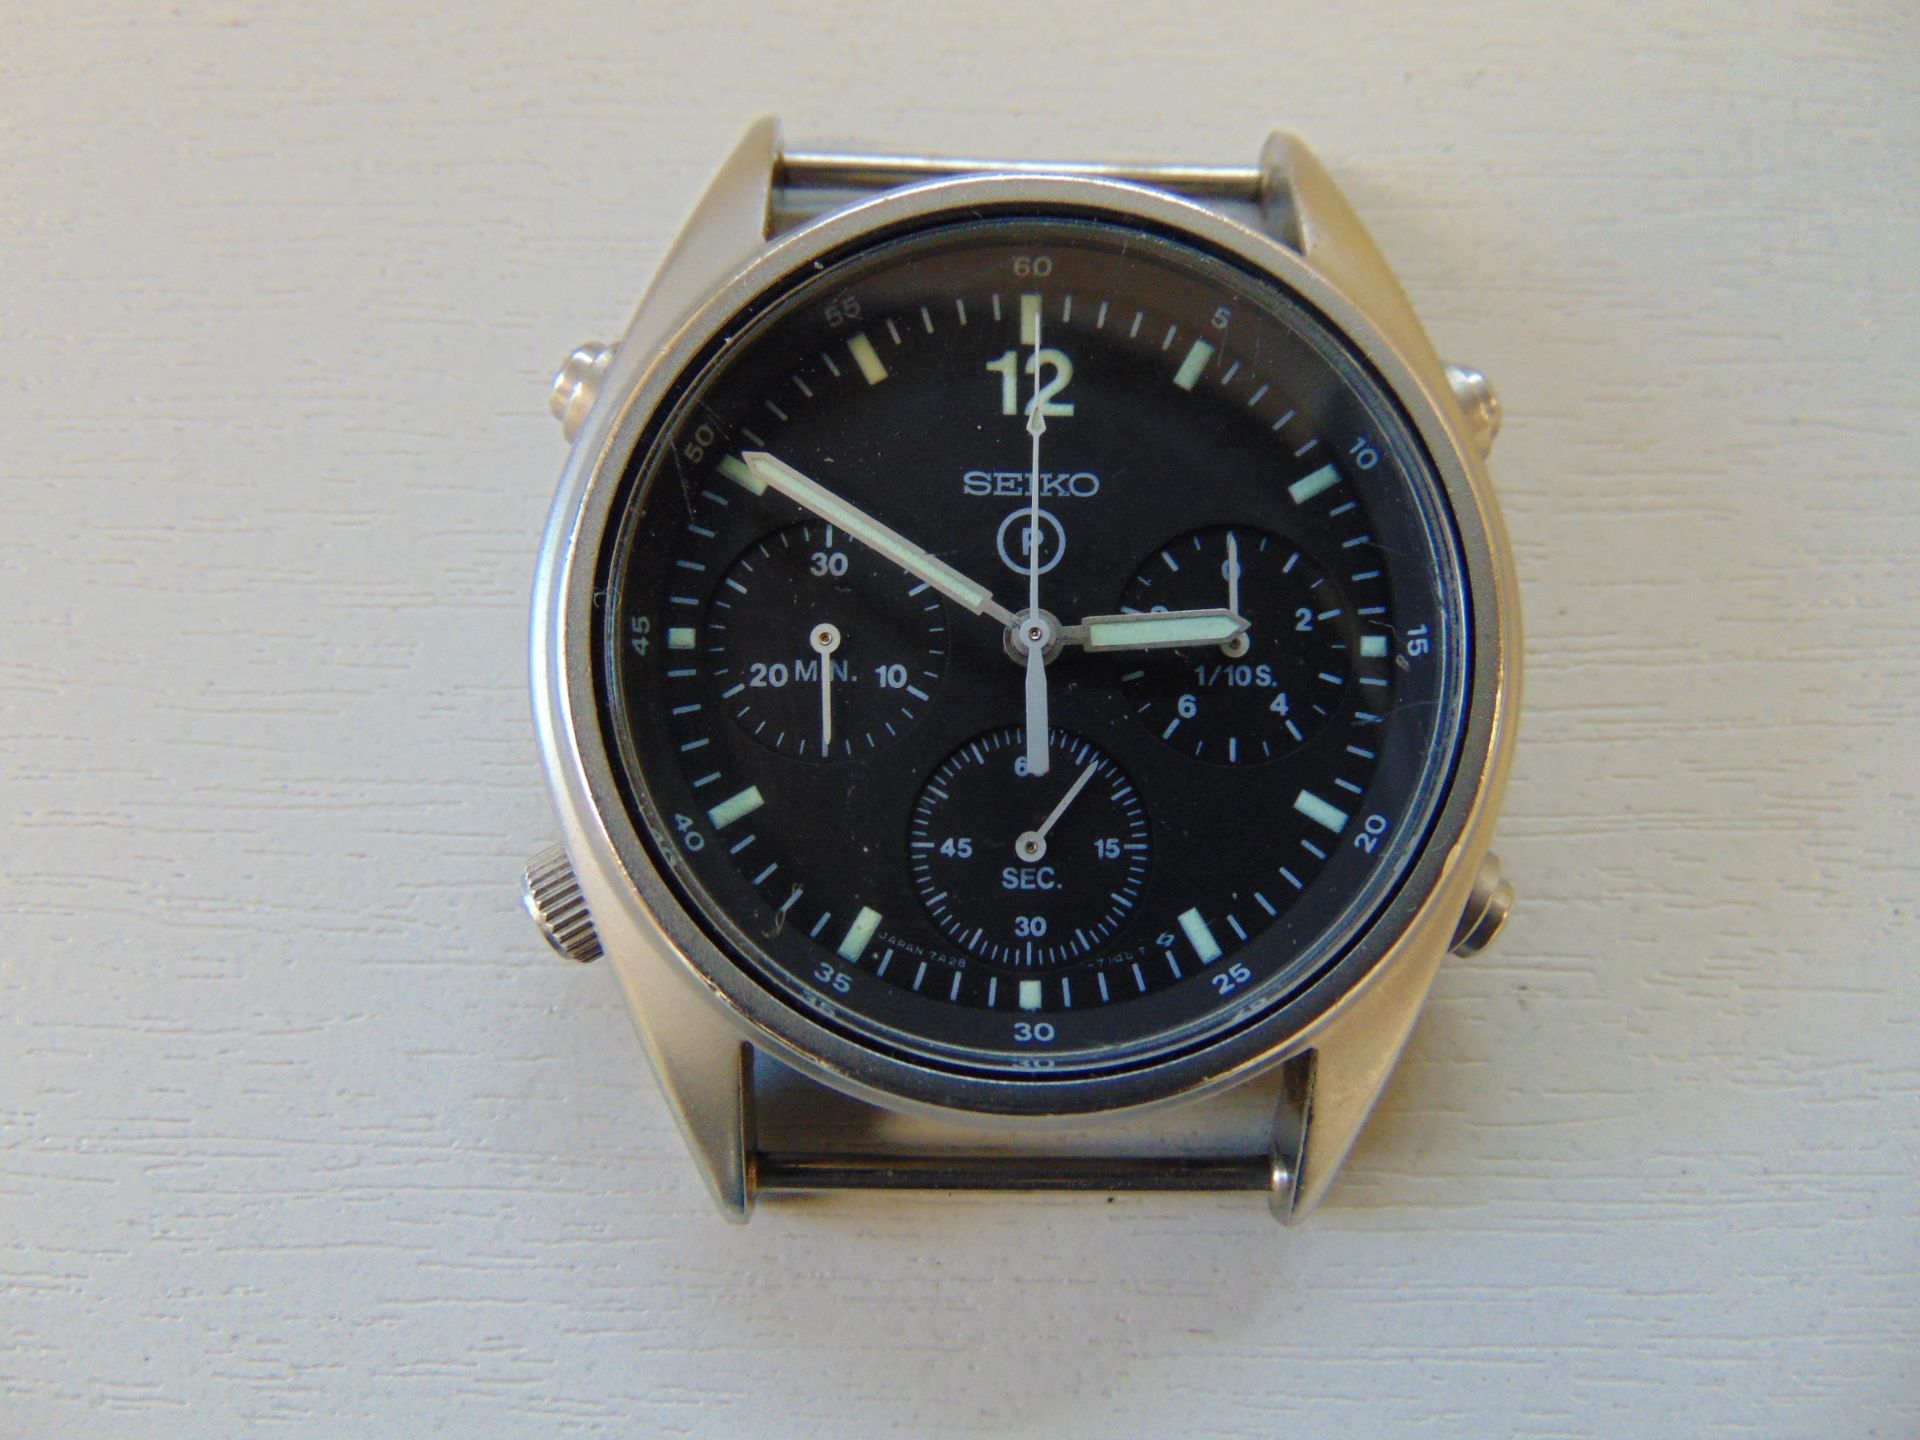 Rare Seiko Generation 1 Aircrew Chrono RAF Harrier Force Issue Nato Marks, Date 1988 - Image 3 of 6